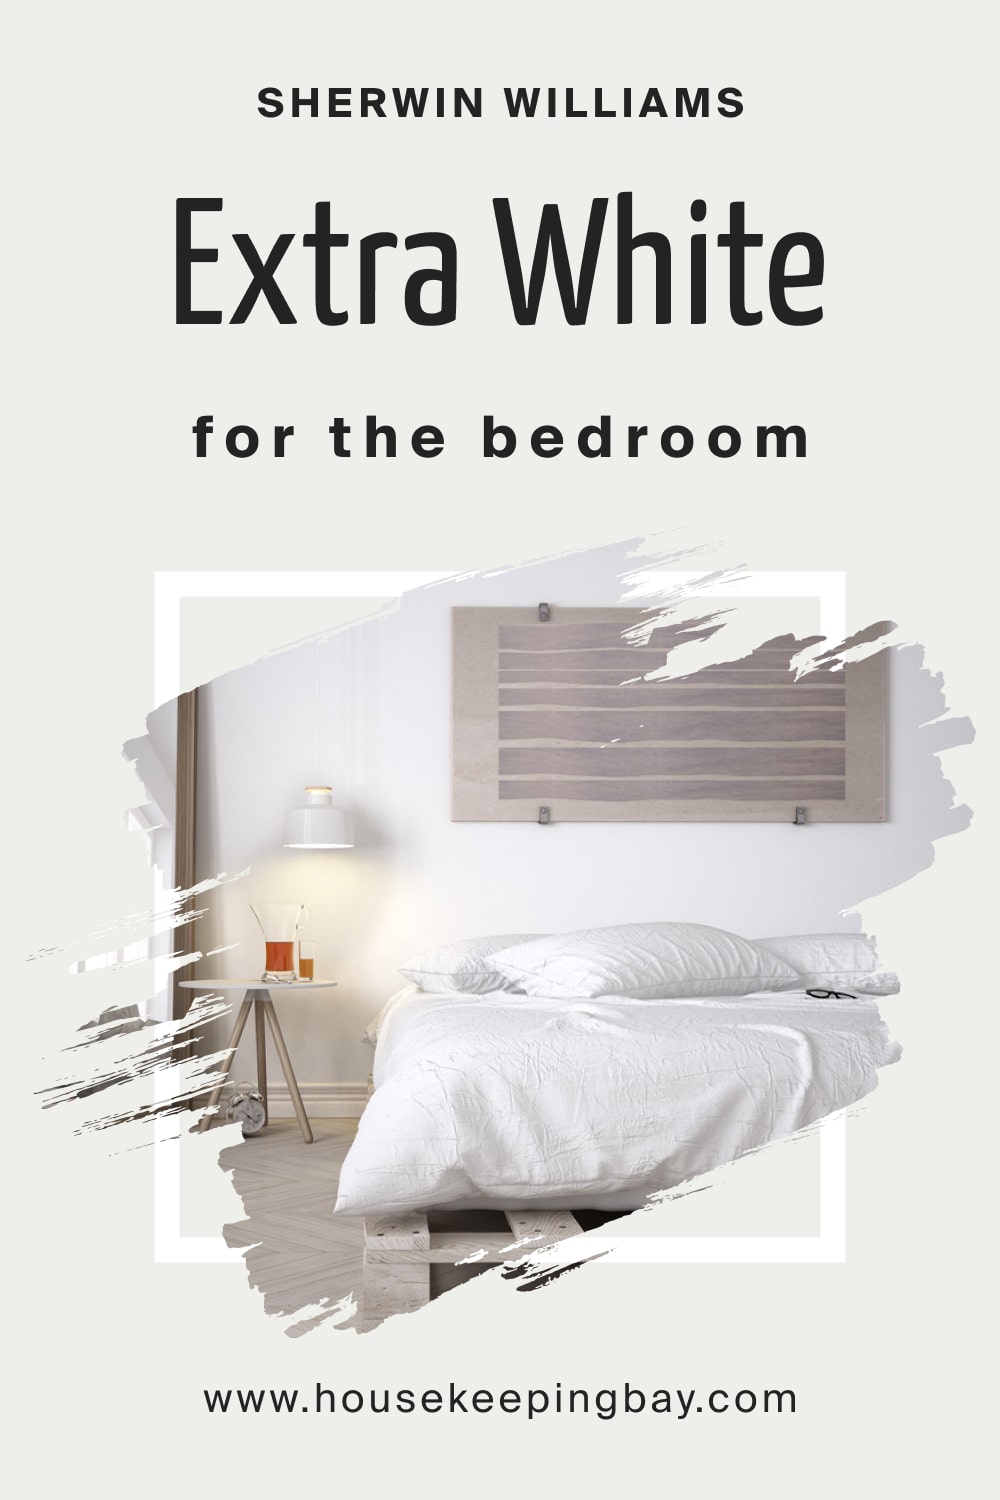 Sherwin Williams. Extra White SW 7006For the bedroom